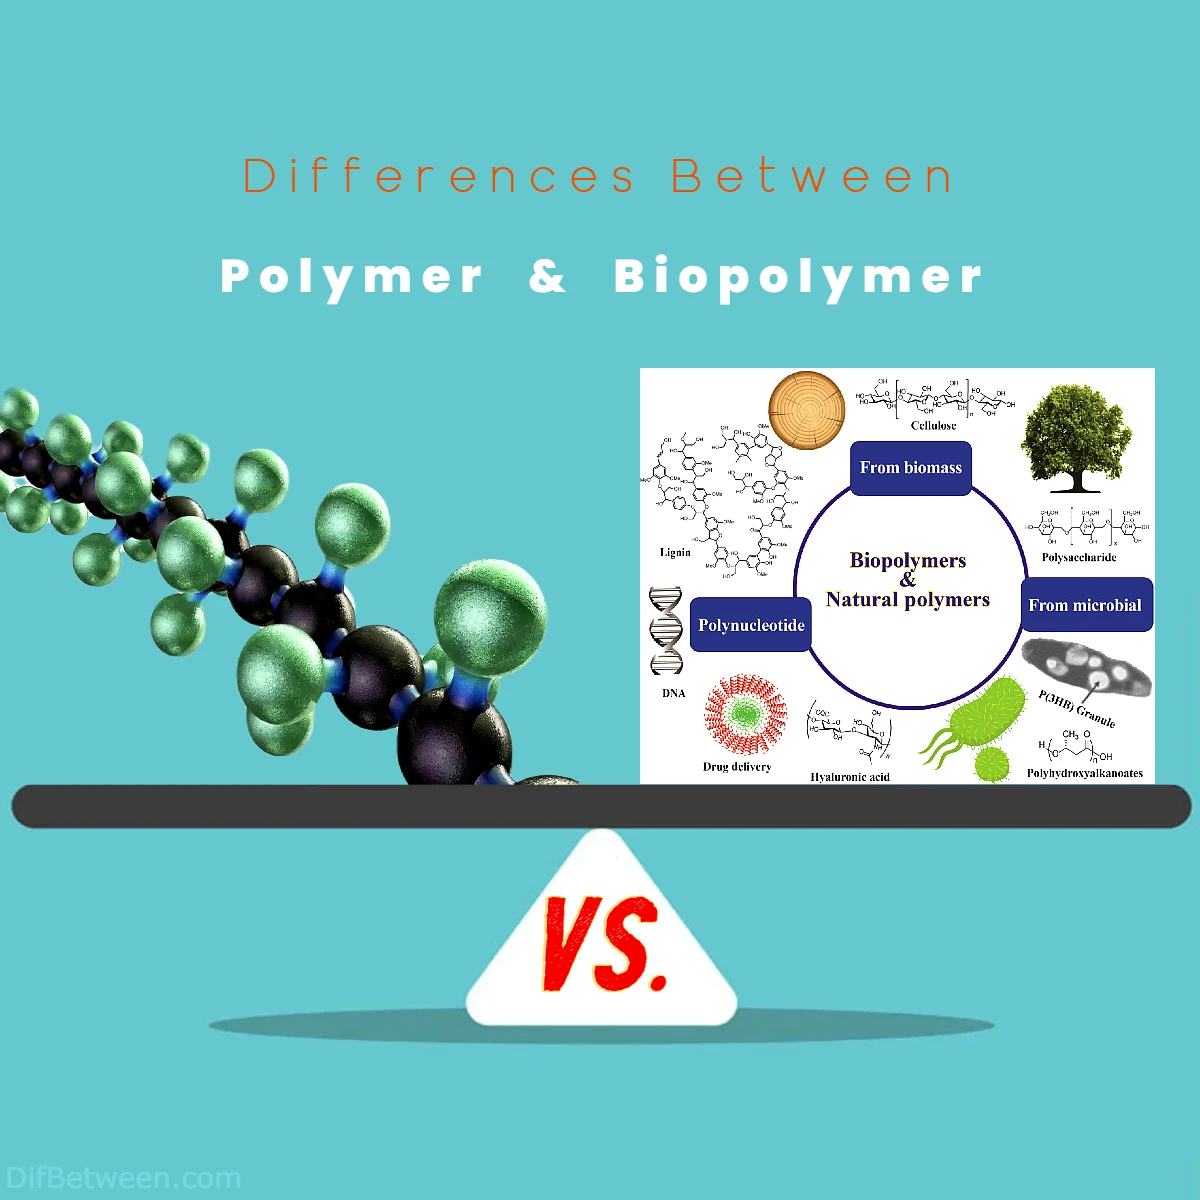 Differences Between Polymer vs Biopolymer